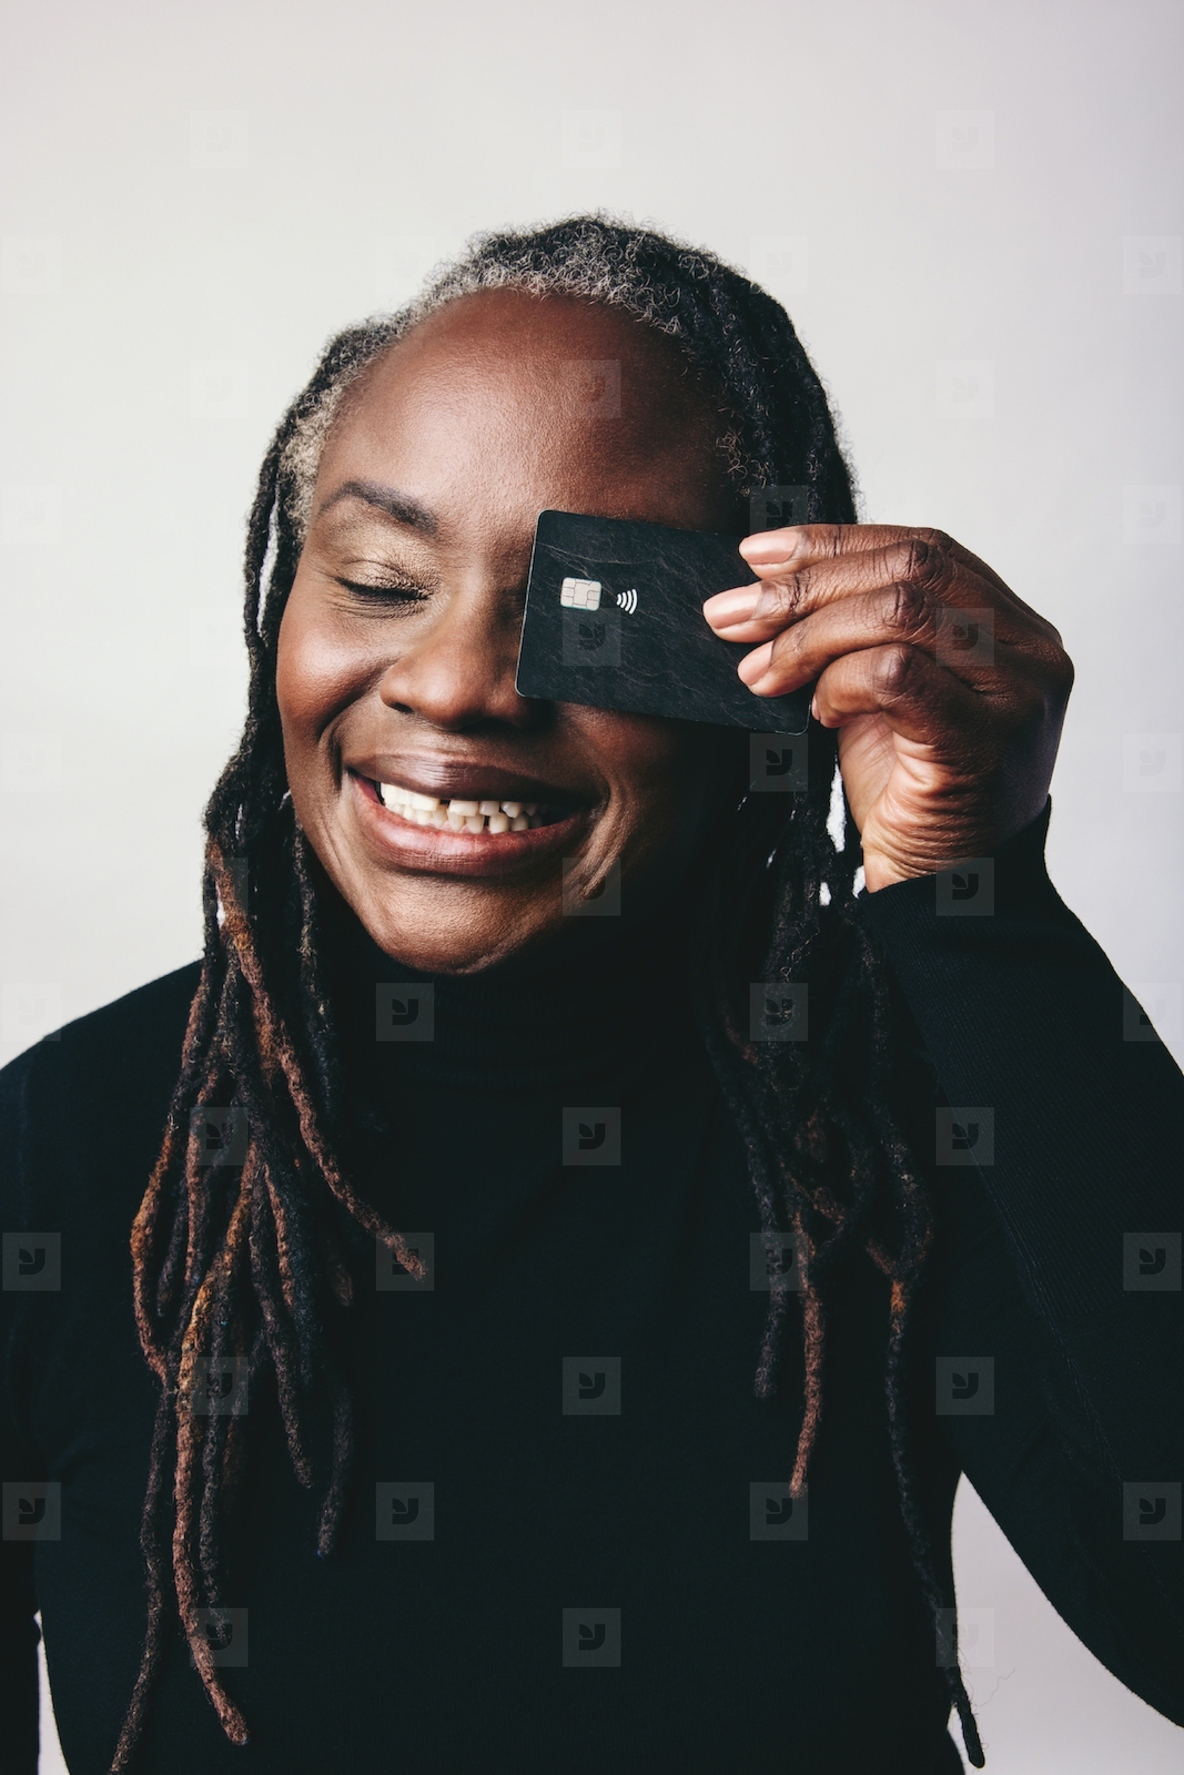 Happy woman with dreadlocks holding a credit card over her eye